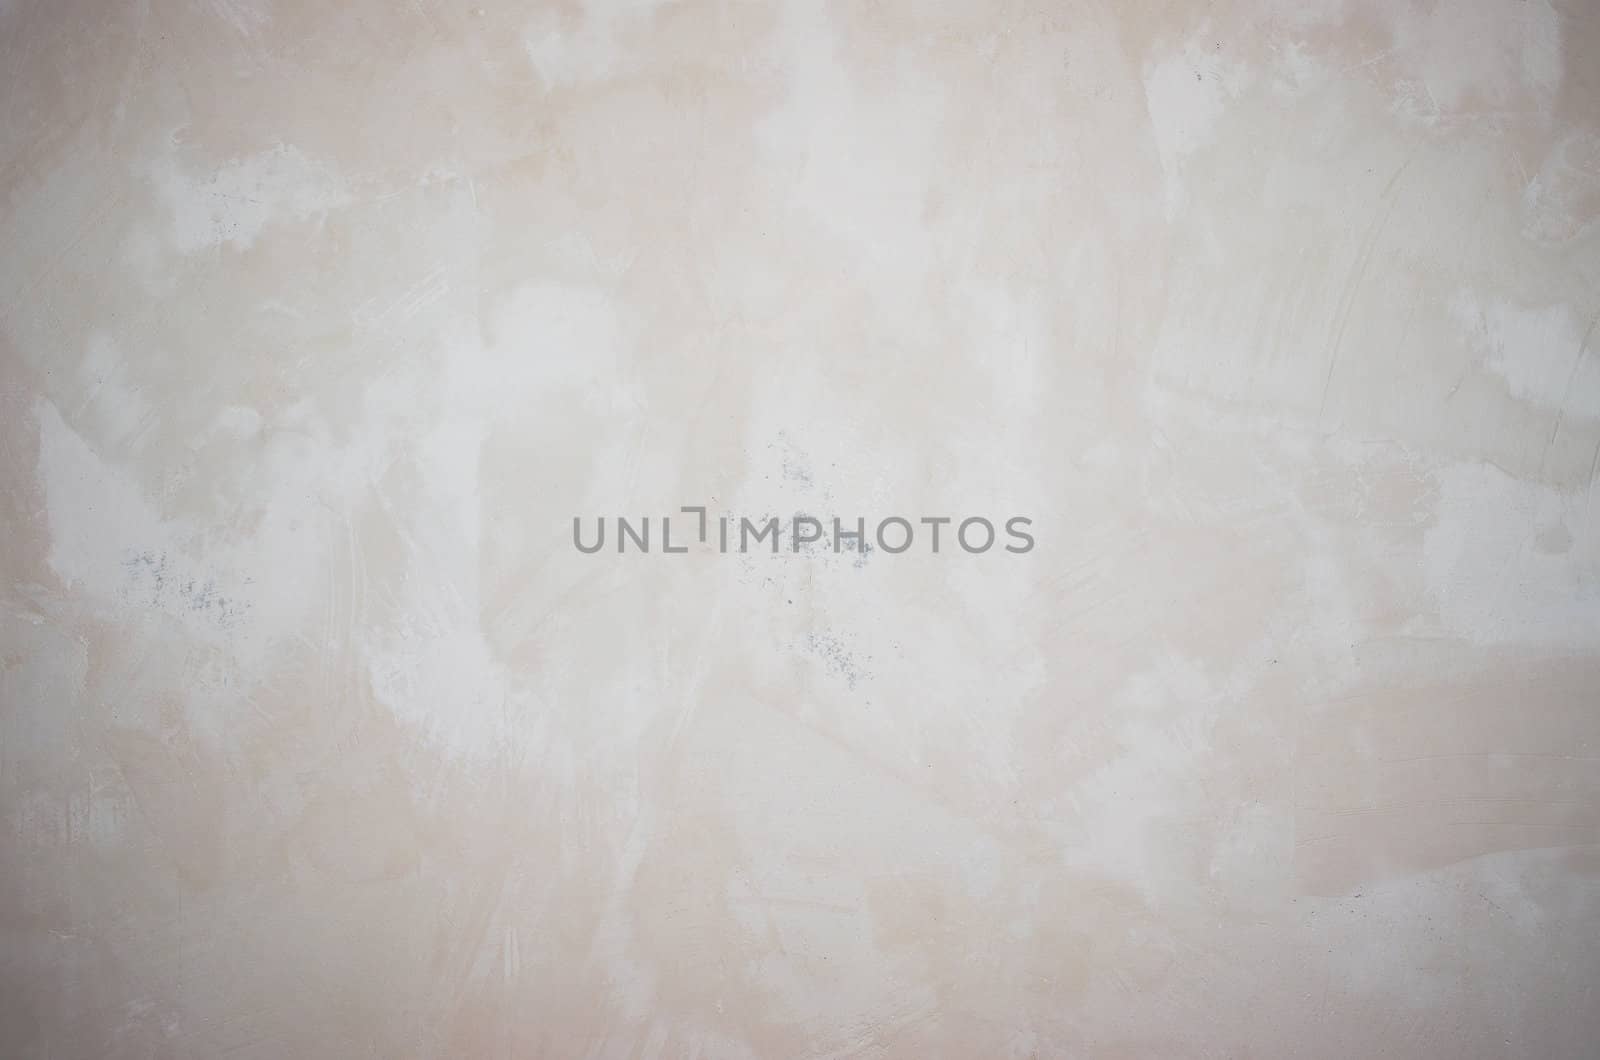 Concrete wall covered with putty as natural background